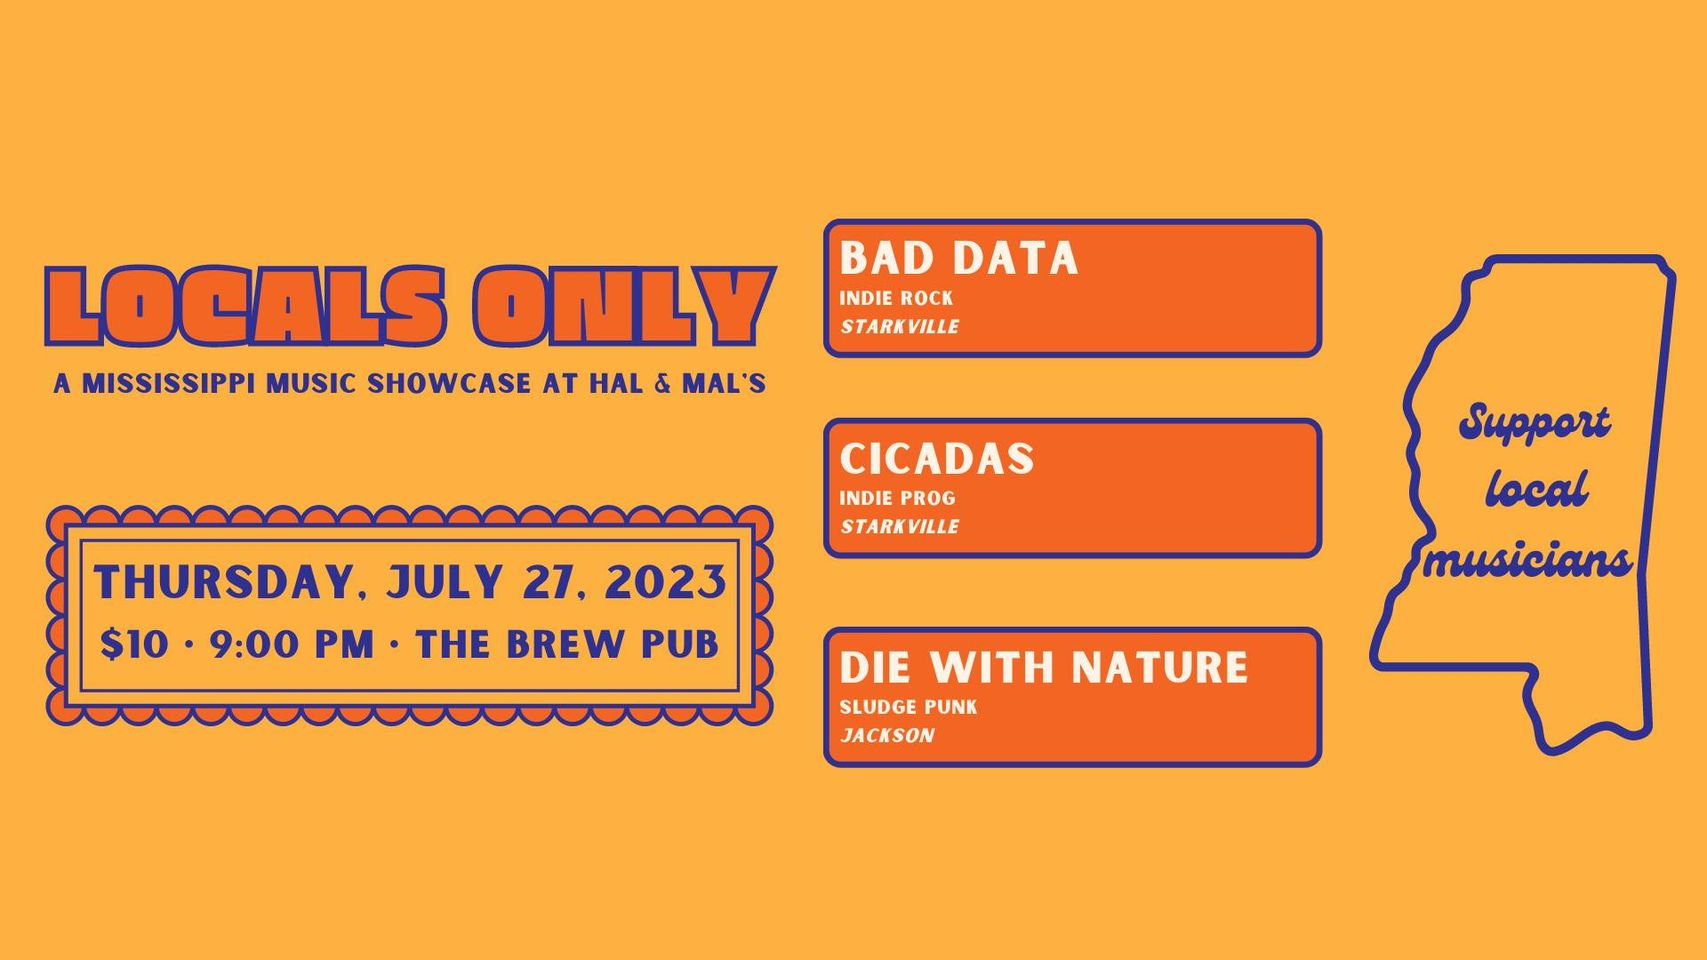 Locals Only with Bad Data, Cicadas, + Die with Nature